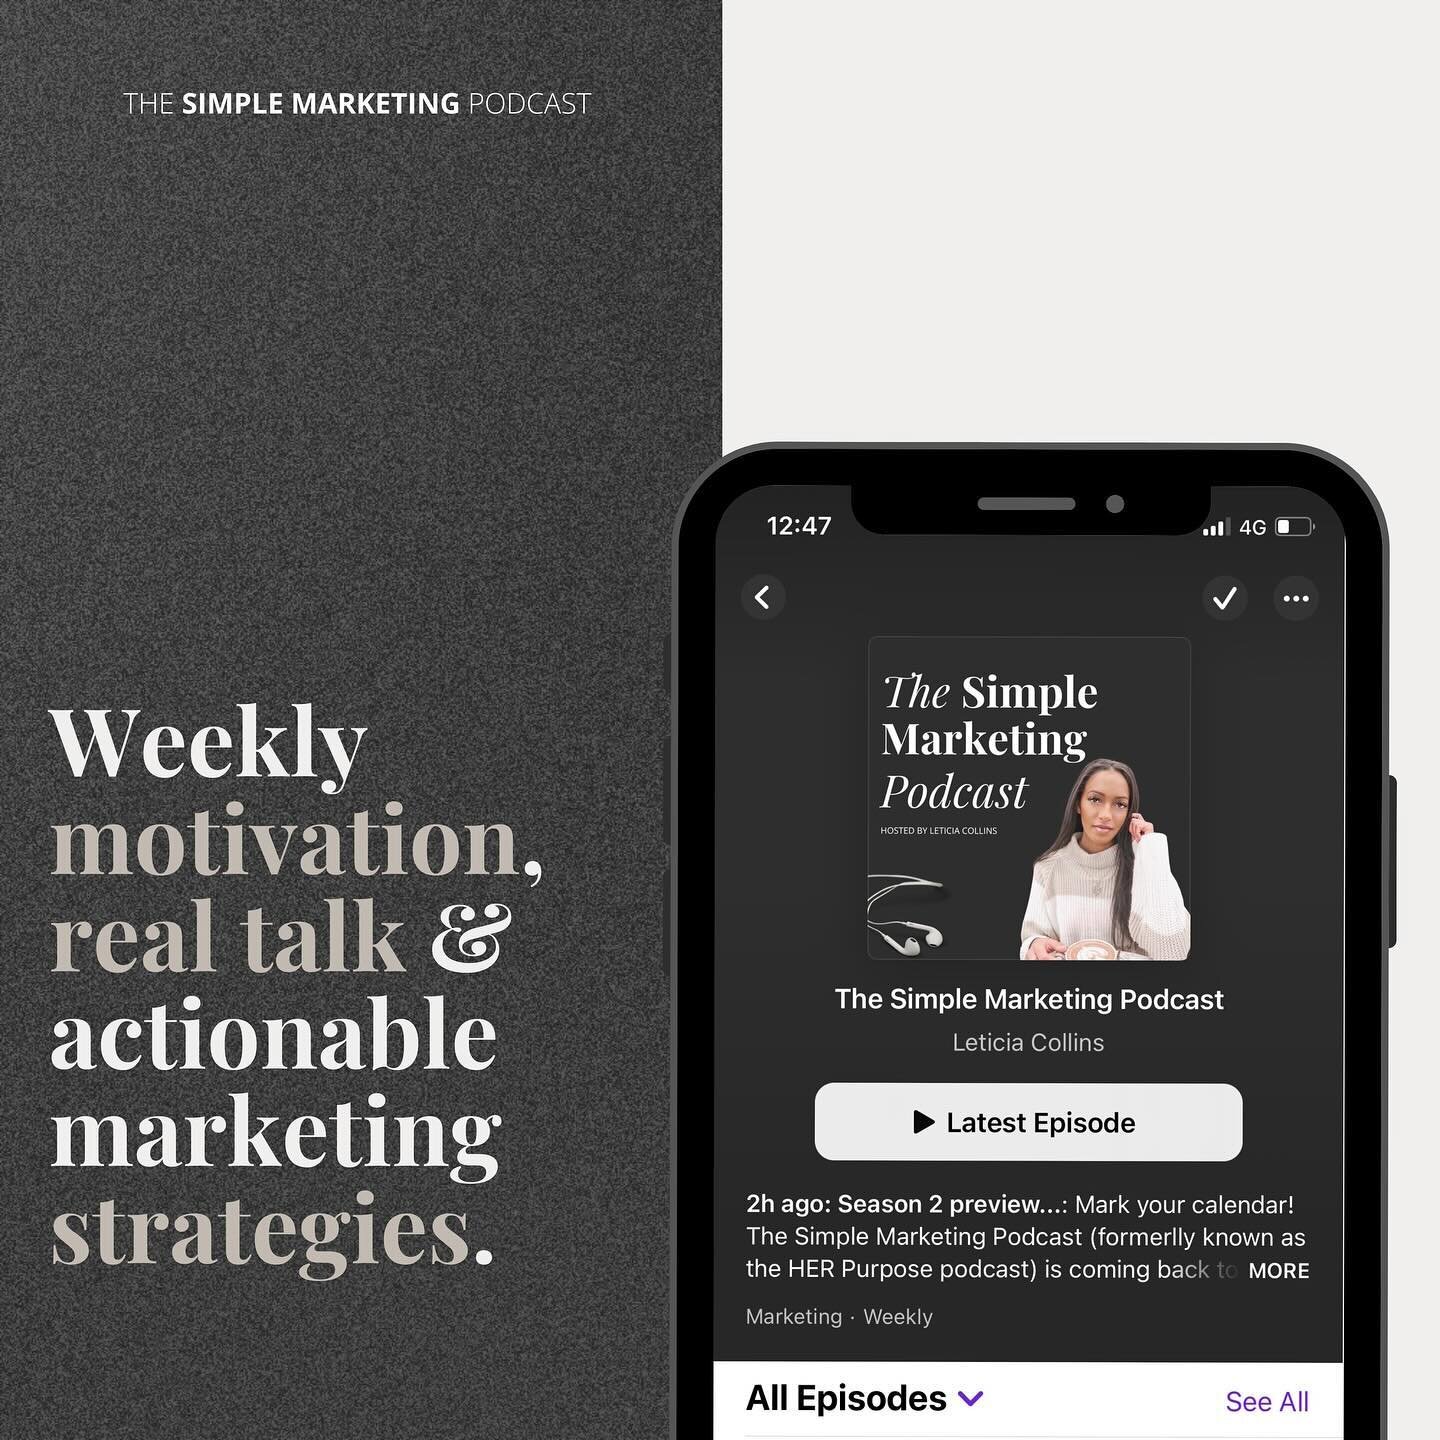 🎙 Grab a cup of coffee, get comfy and tune in to The Simple Marketing Podcast every Monday for&hellip;

&nbsp;✔️ Sustainable marketing tips
✔️ Scalable business strategies
✔️ Authentic sales advice
✔️ Evergreen strategies

The Simple Marketing Podca